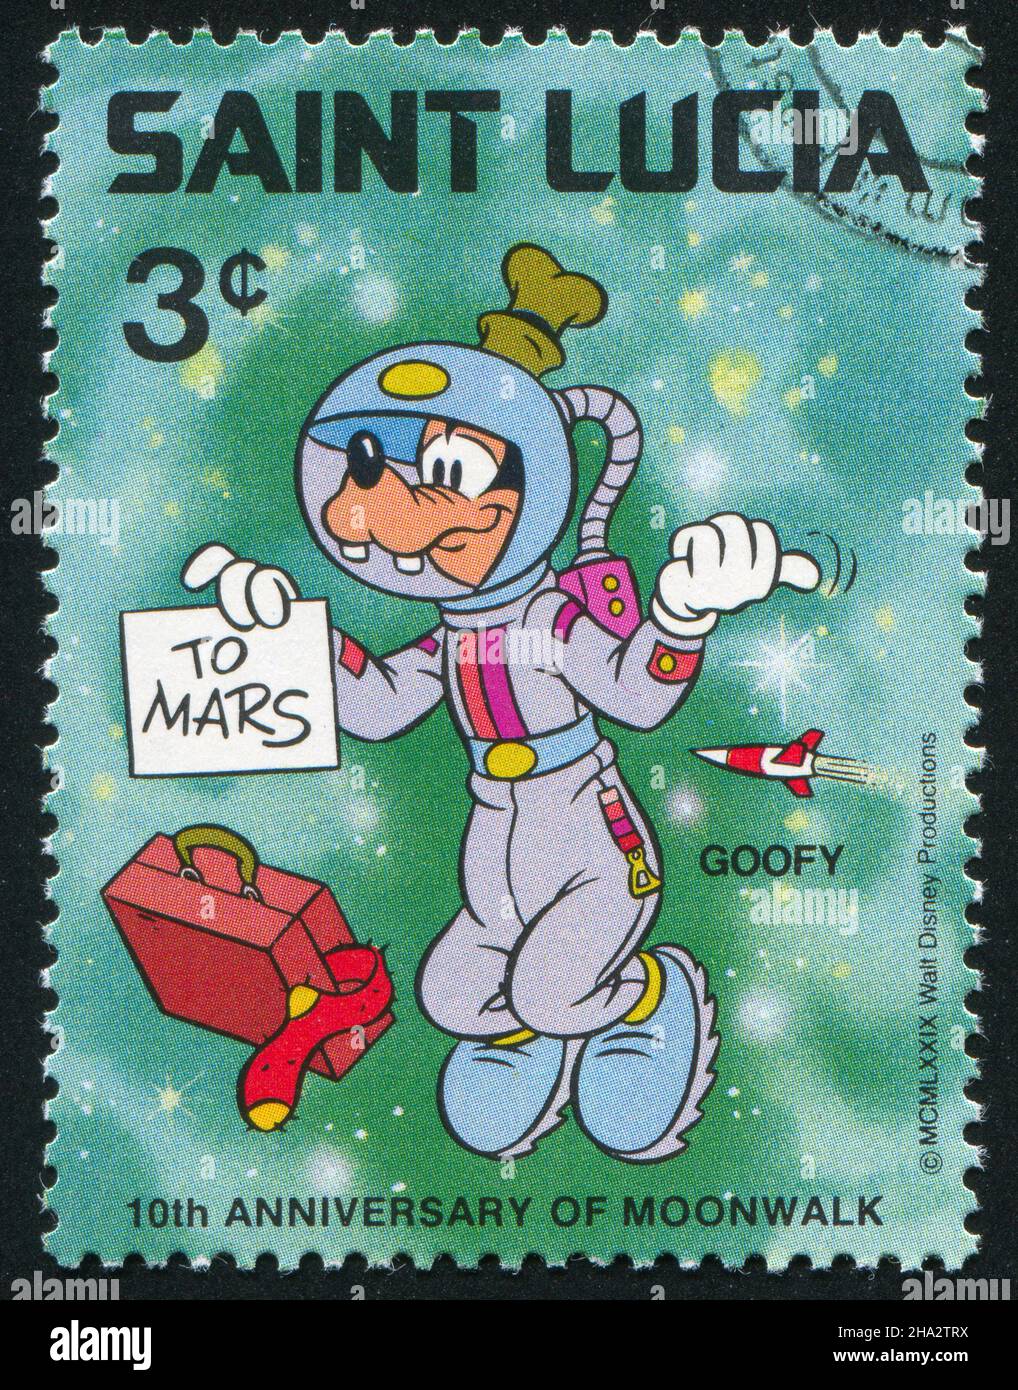 SAINT LUCIA - CIRCA 1980: stamp printed by Saint Lucia, shows shows Walt Disney Characters, Space scenes, Goofy hitch hiking, circa 1980. Stock Photo